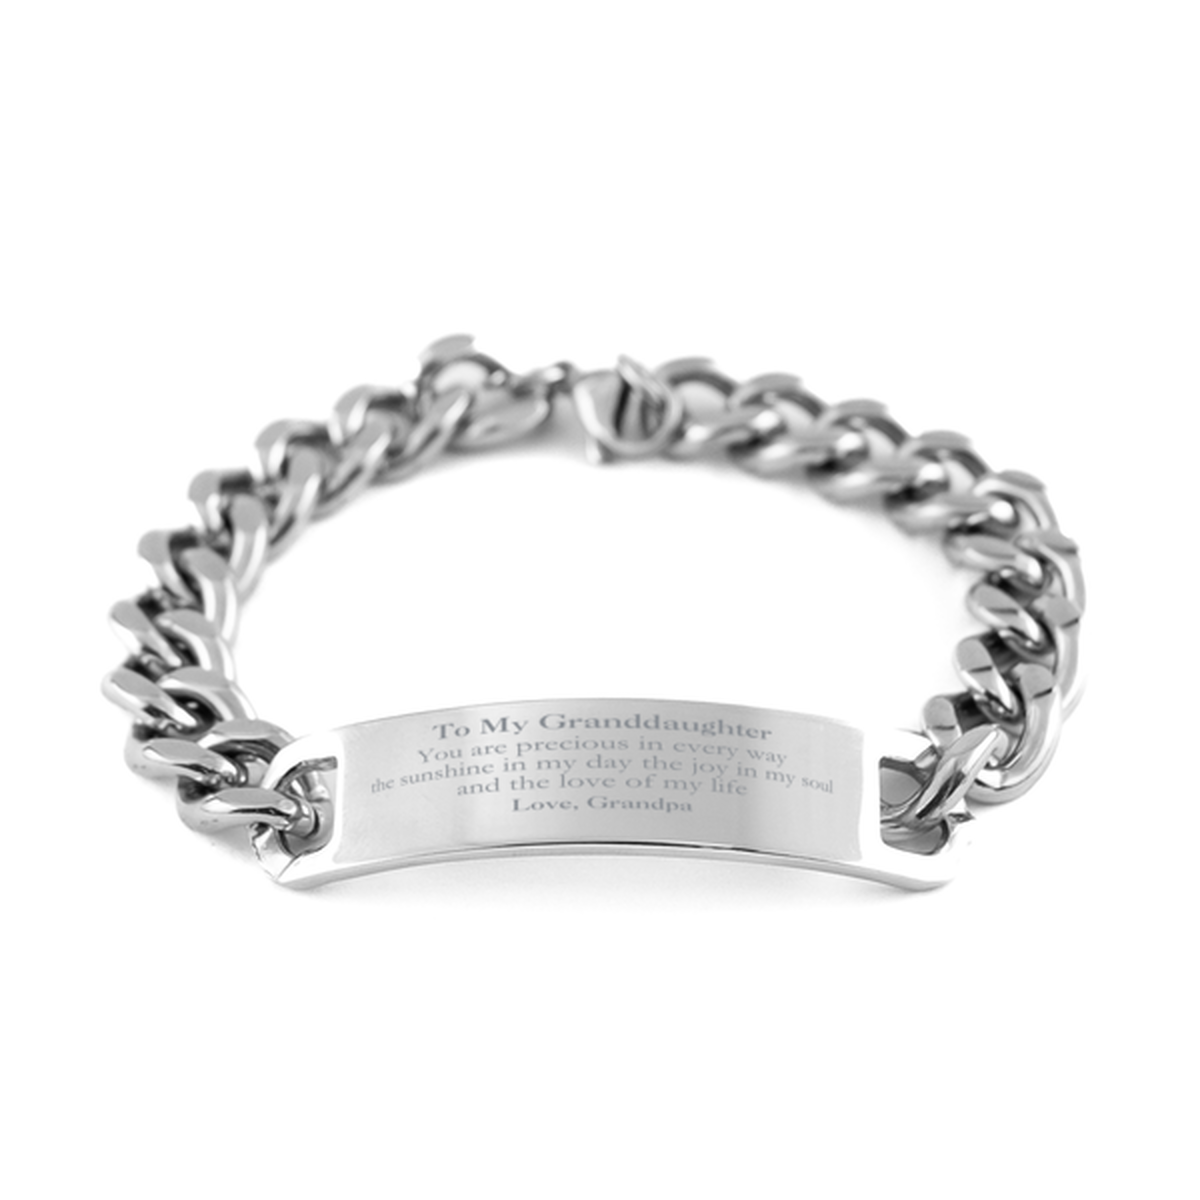 Graduation Gifts for Granddaughter Cuban Chain Stainless Steel Bracelet Present from Grandpa, Christmas Granddaughter Birthday Gifts Granddaughter You are precious in every way the sunshine in my day. Love, Grandpa